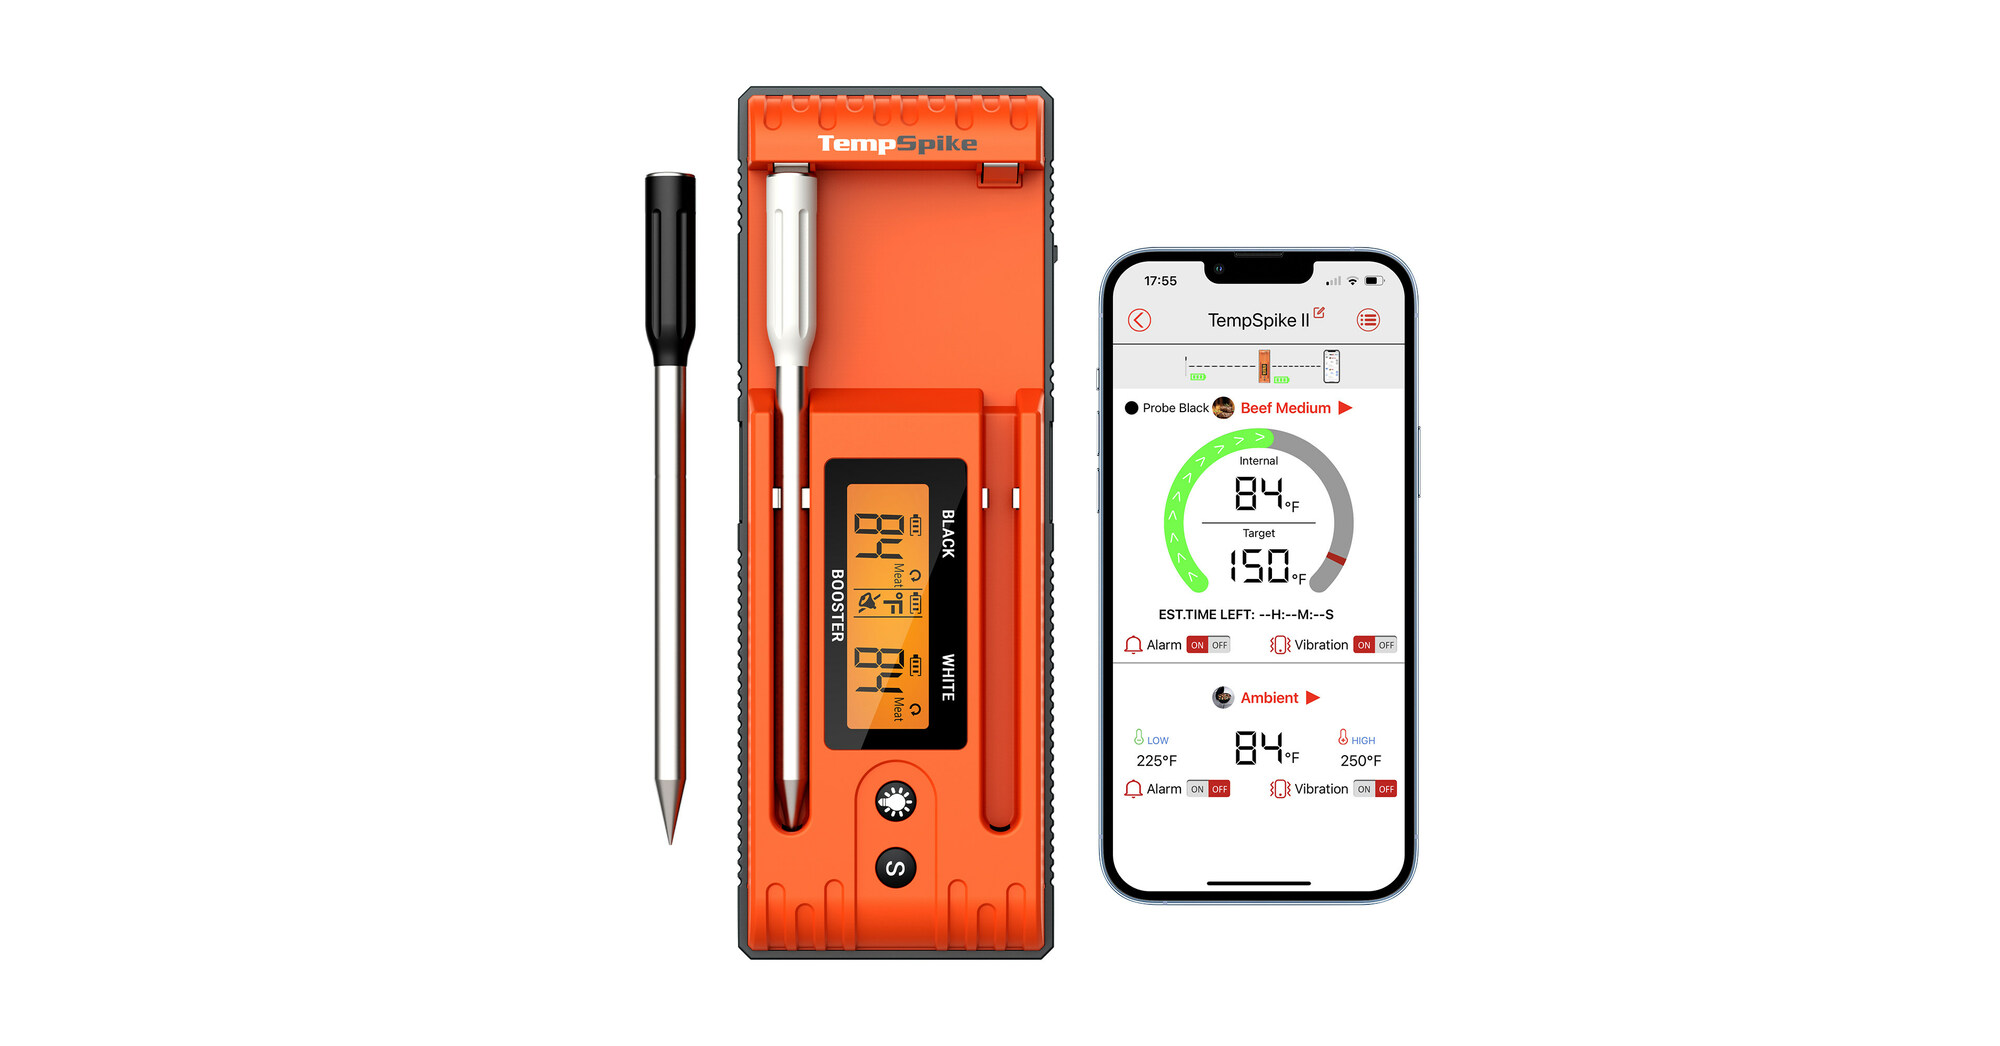 ThermoPro 2-Probe BlueTooth Thermometer with Monitor